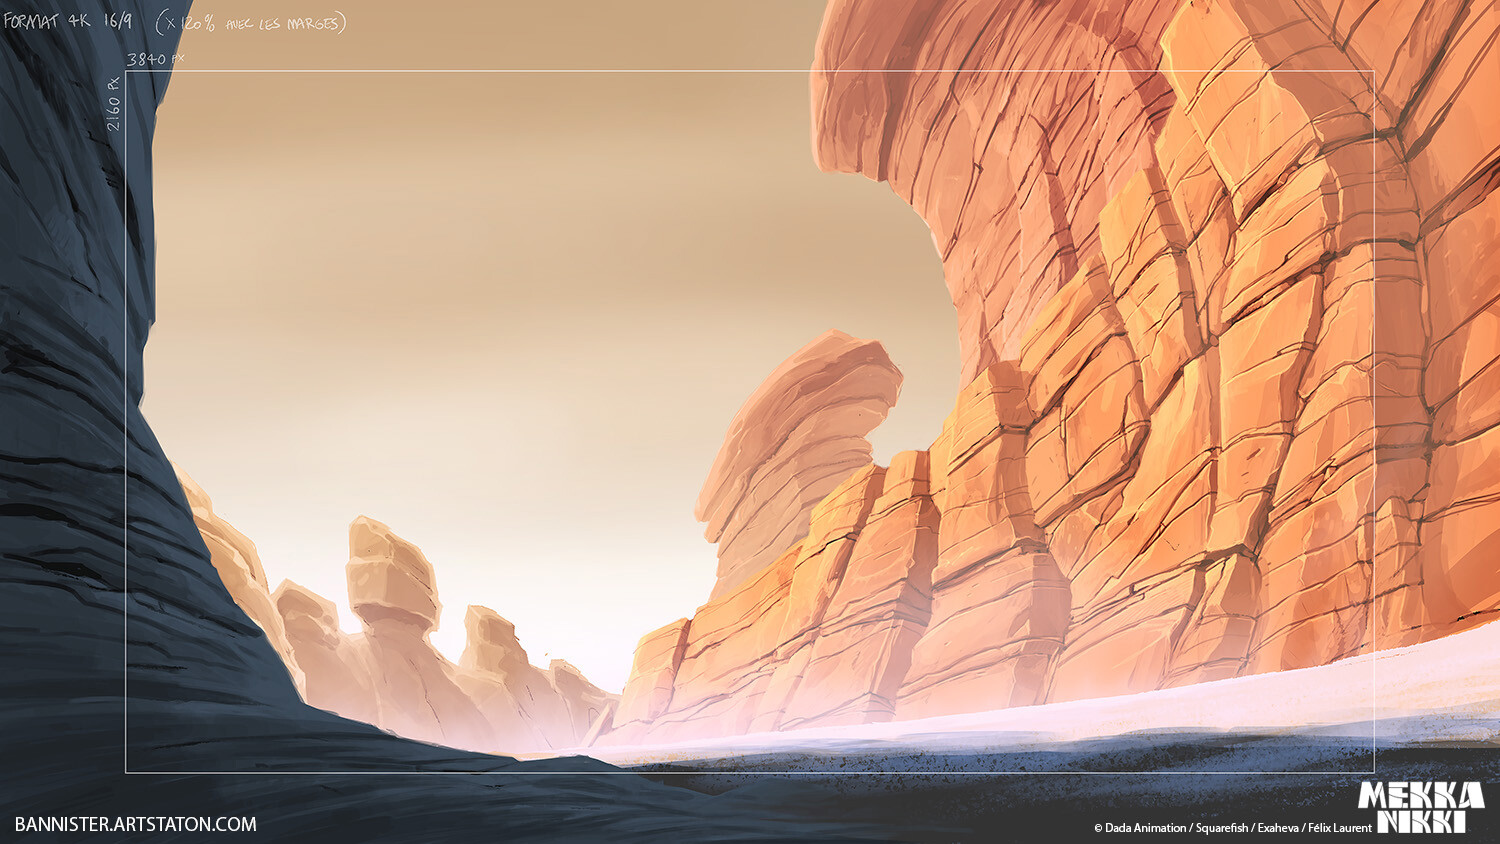 Desert wide shot.
Painting rocks was real fun, I like this atmosphere.